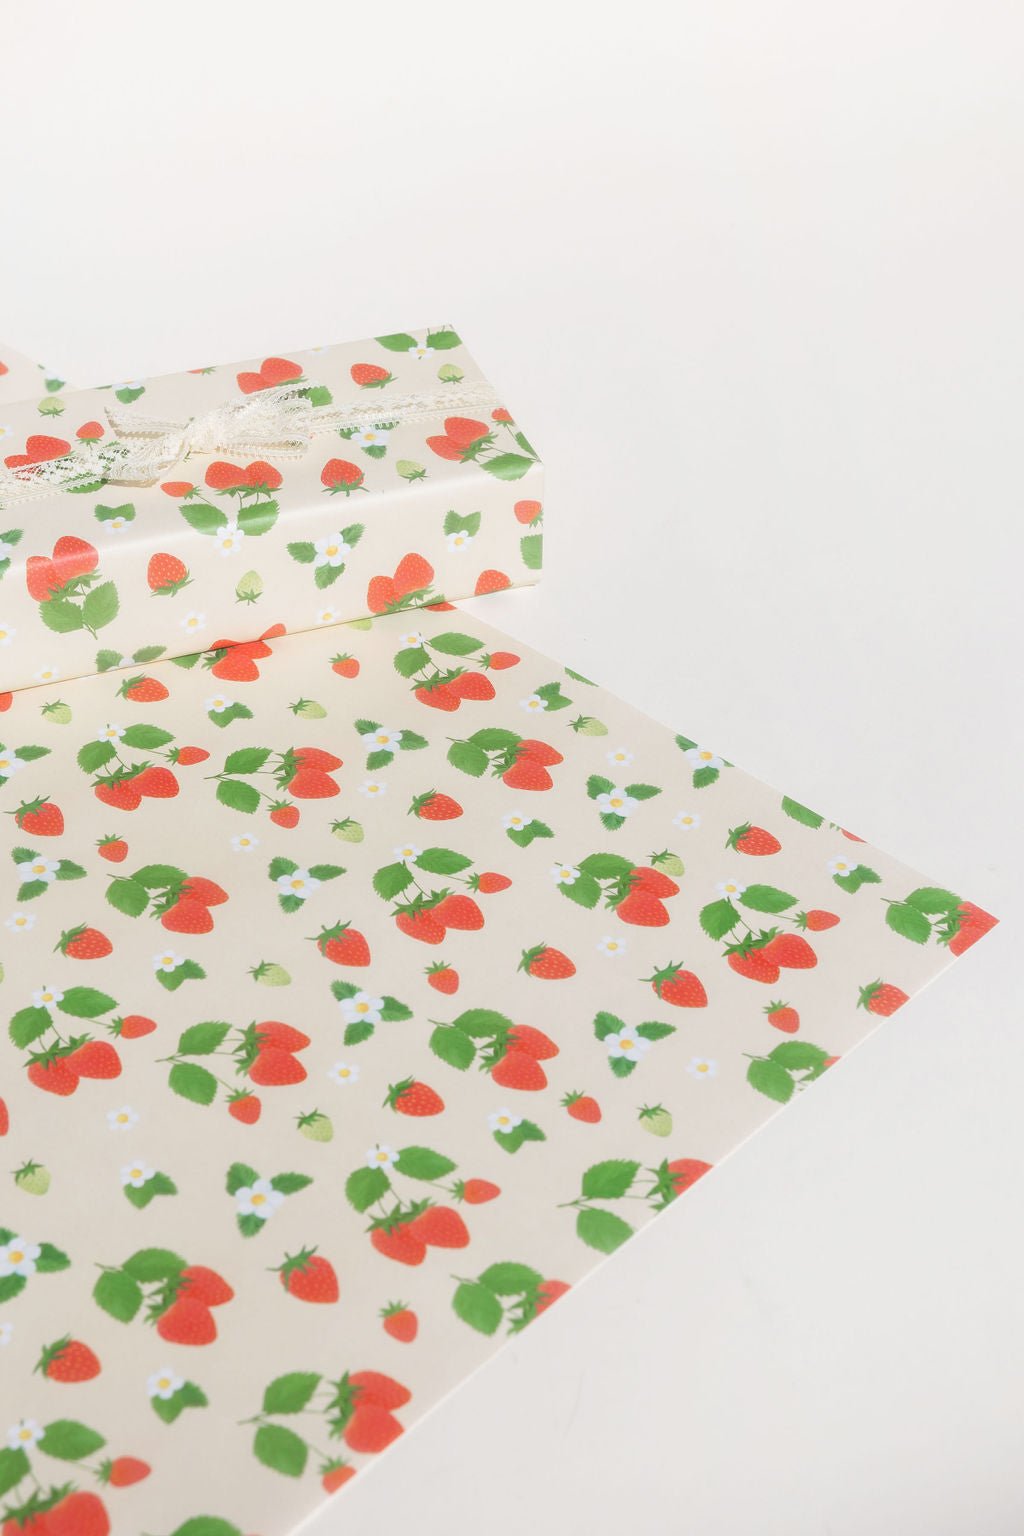 Our Strawberry holiday gift wrap features red strawberries on a stem of two or three, surrounded by smaller and larger red or green strawberries and white flowers printed on a cream colored background.